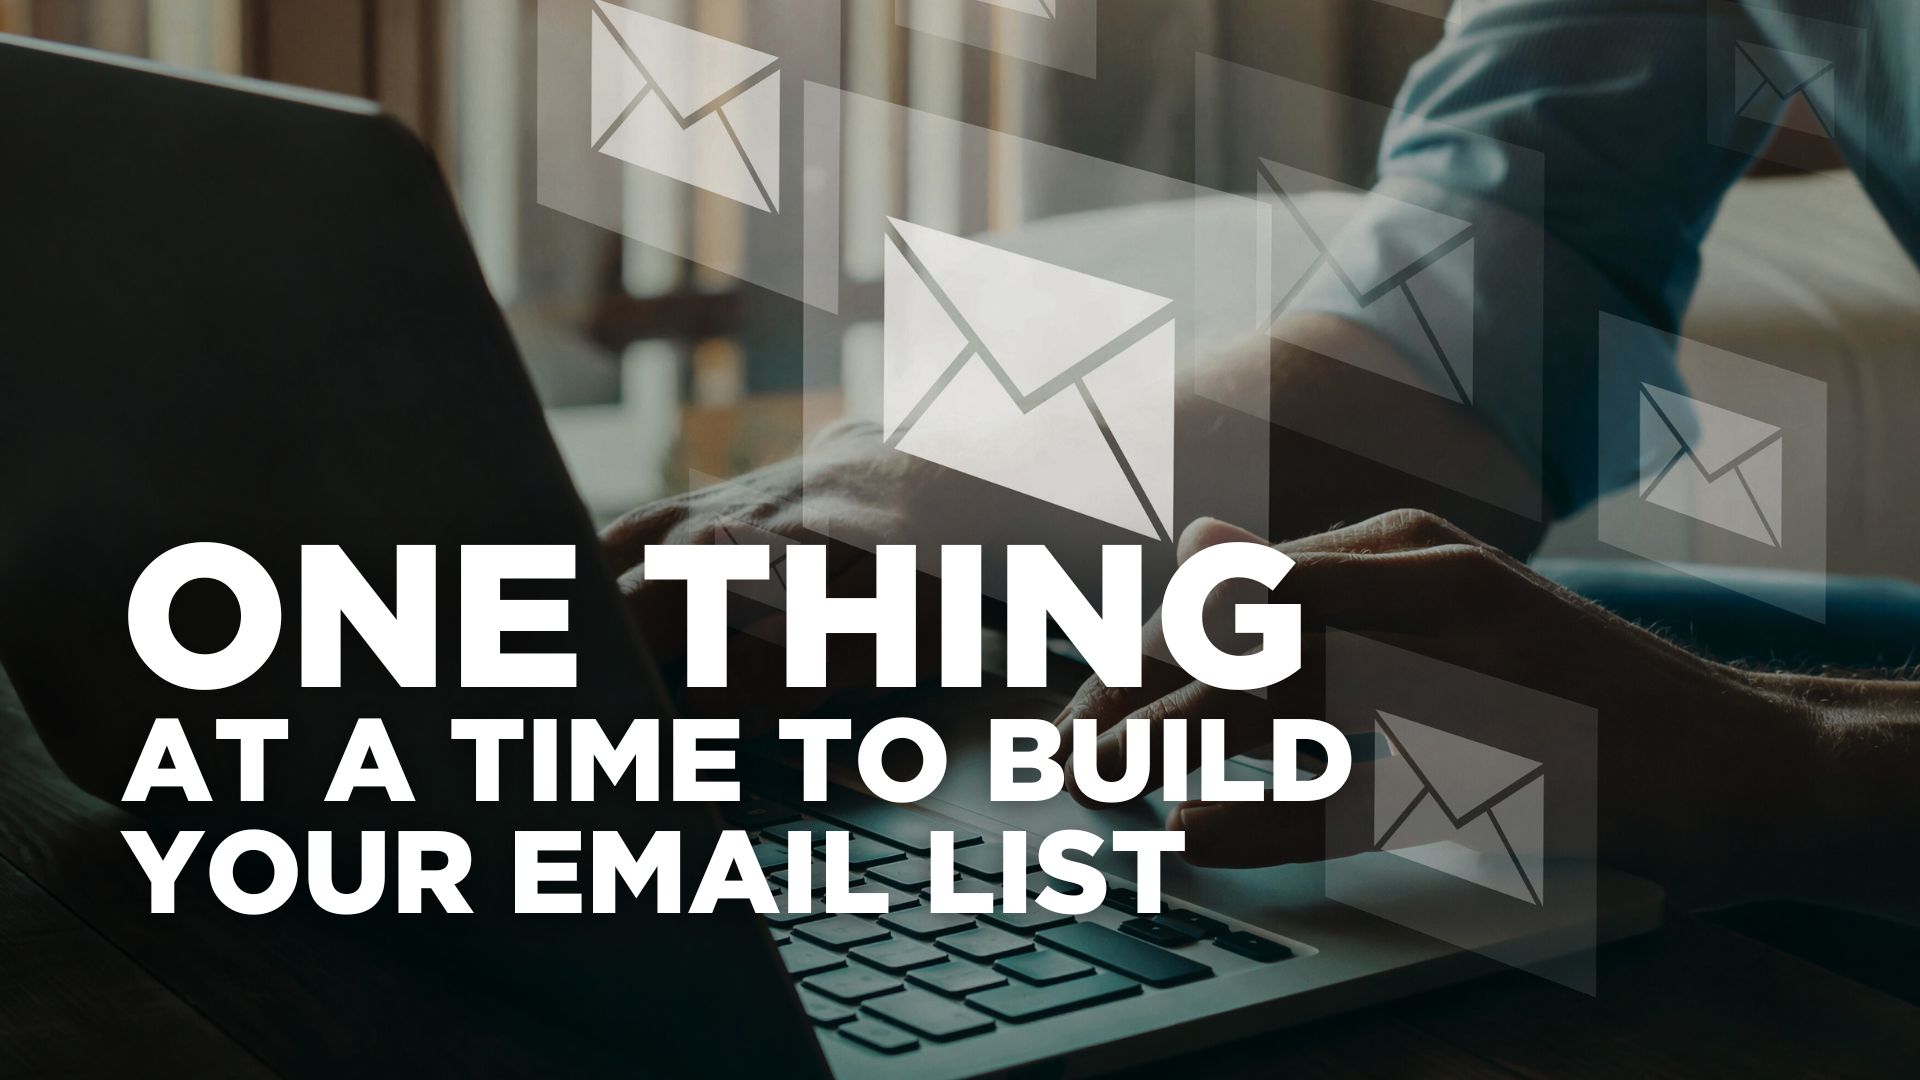 One thing at a time to build your email list